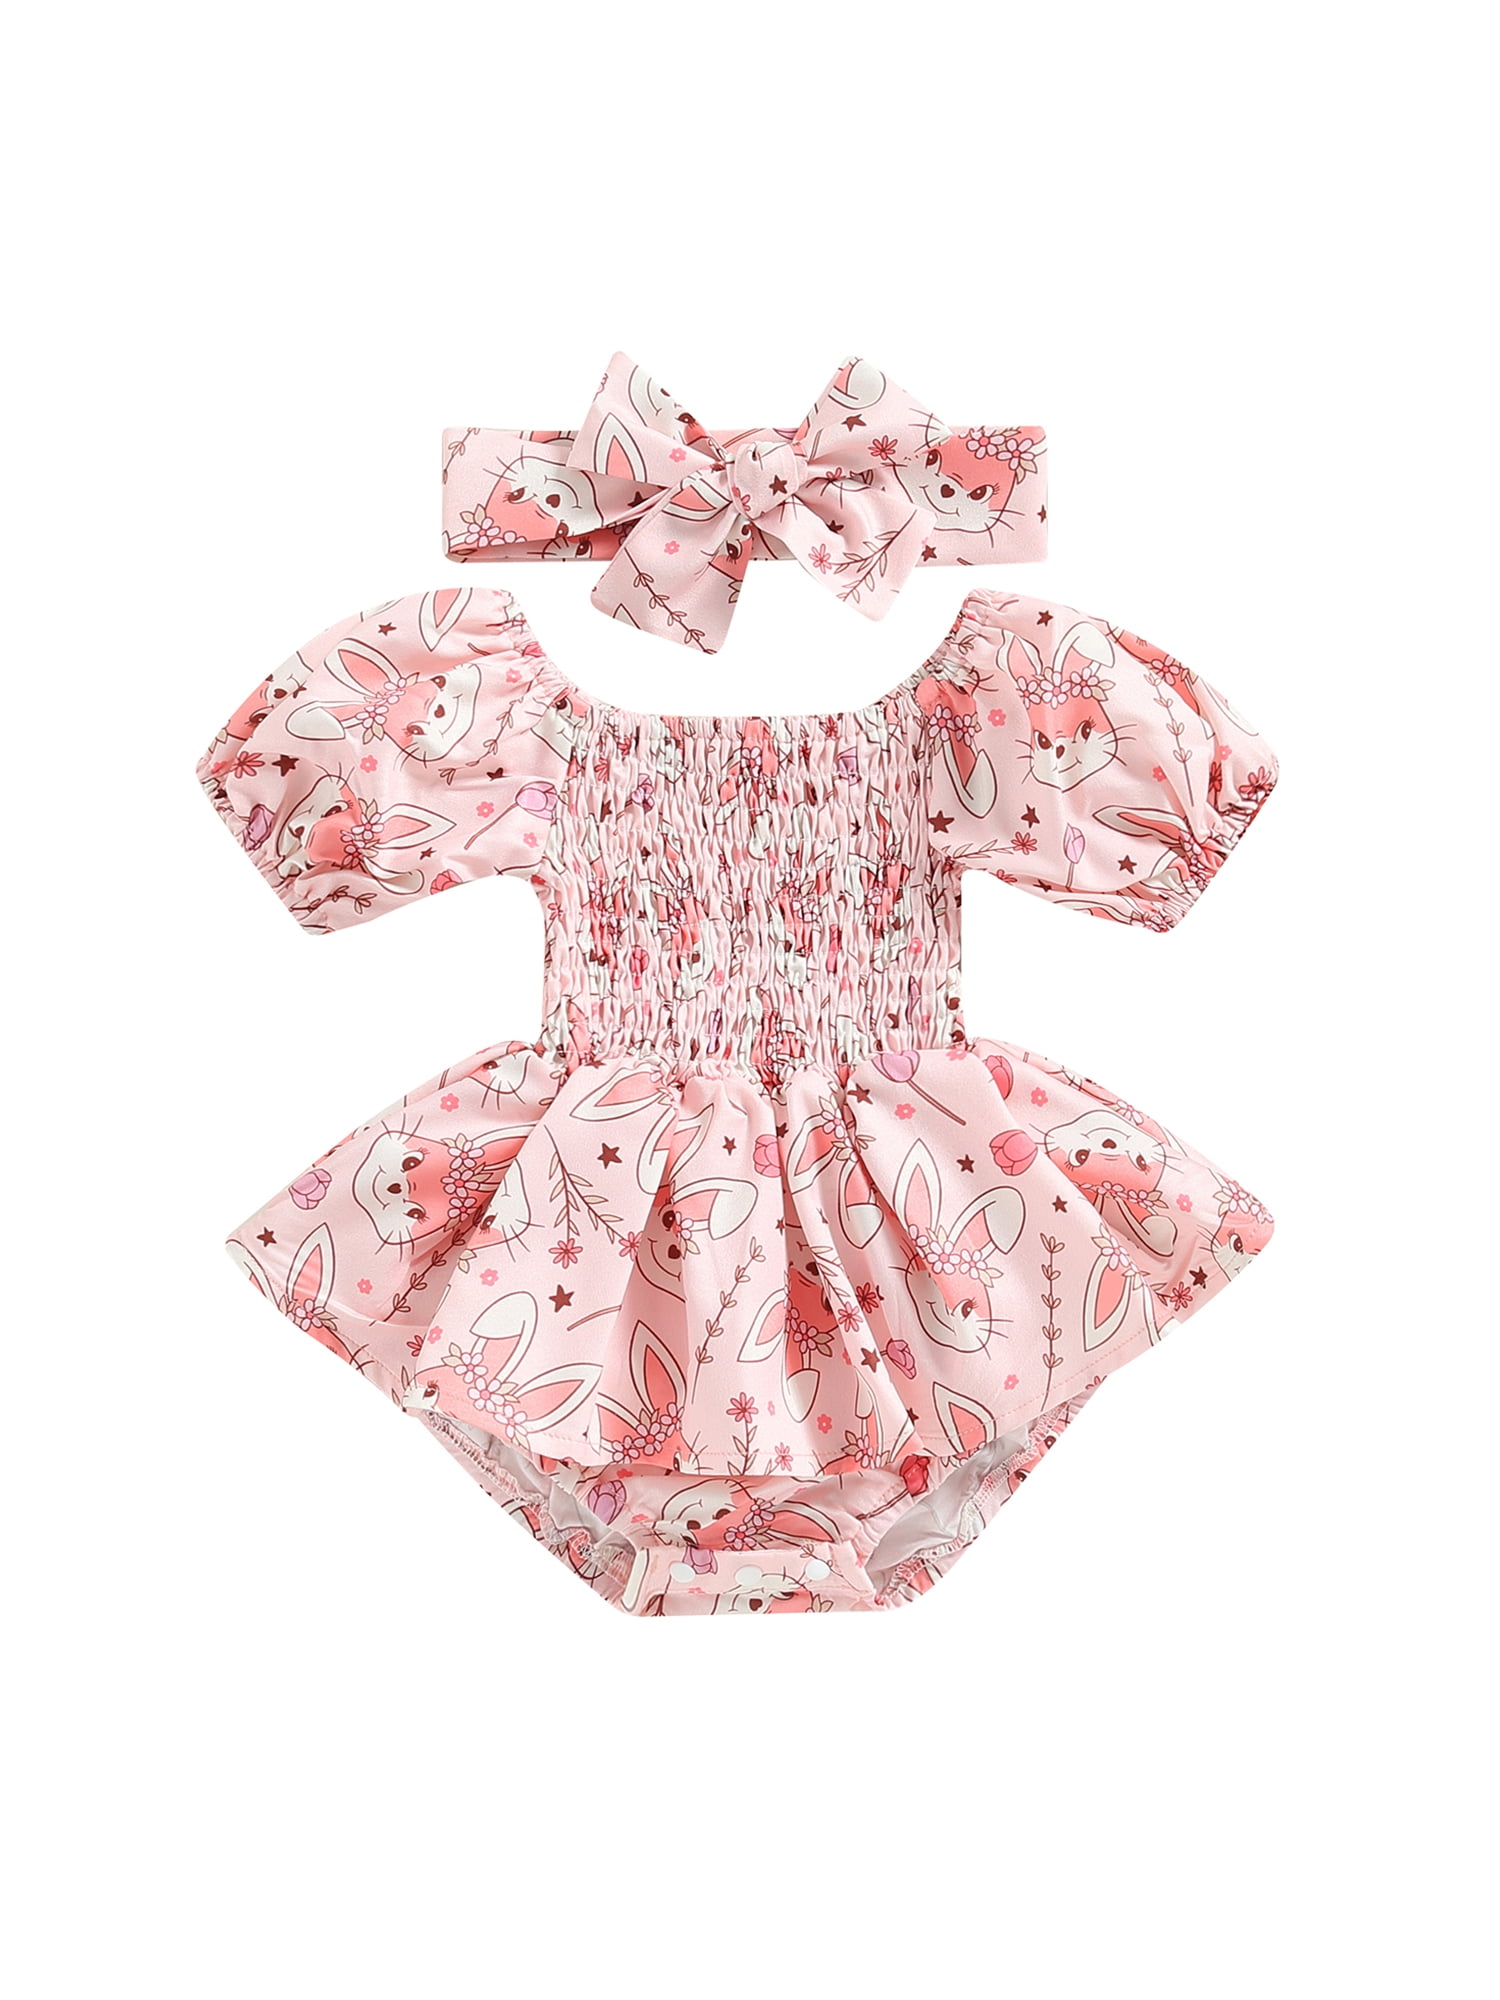 Newborn Easter Outfit Baby Girls Bunny Dress Romper Smocked Dresses ...